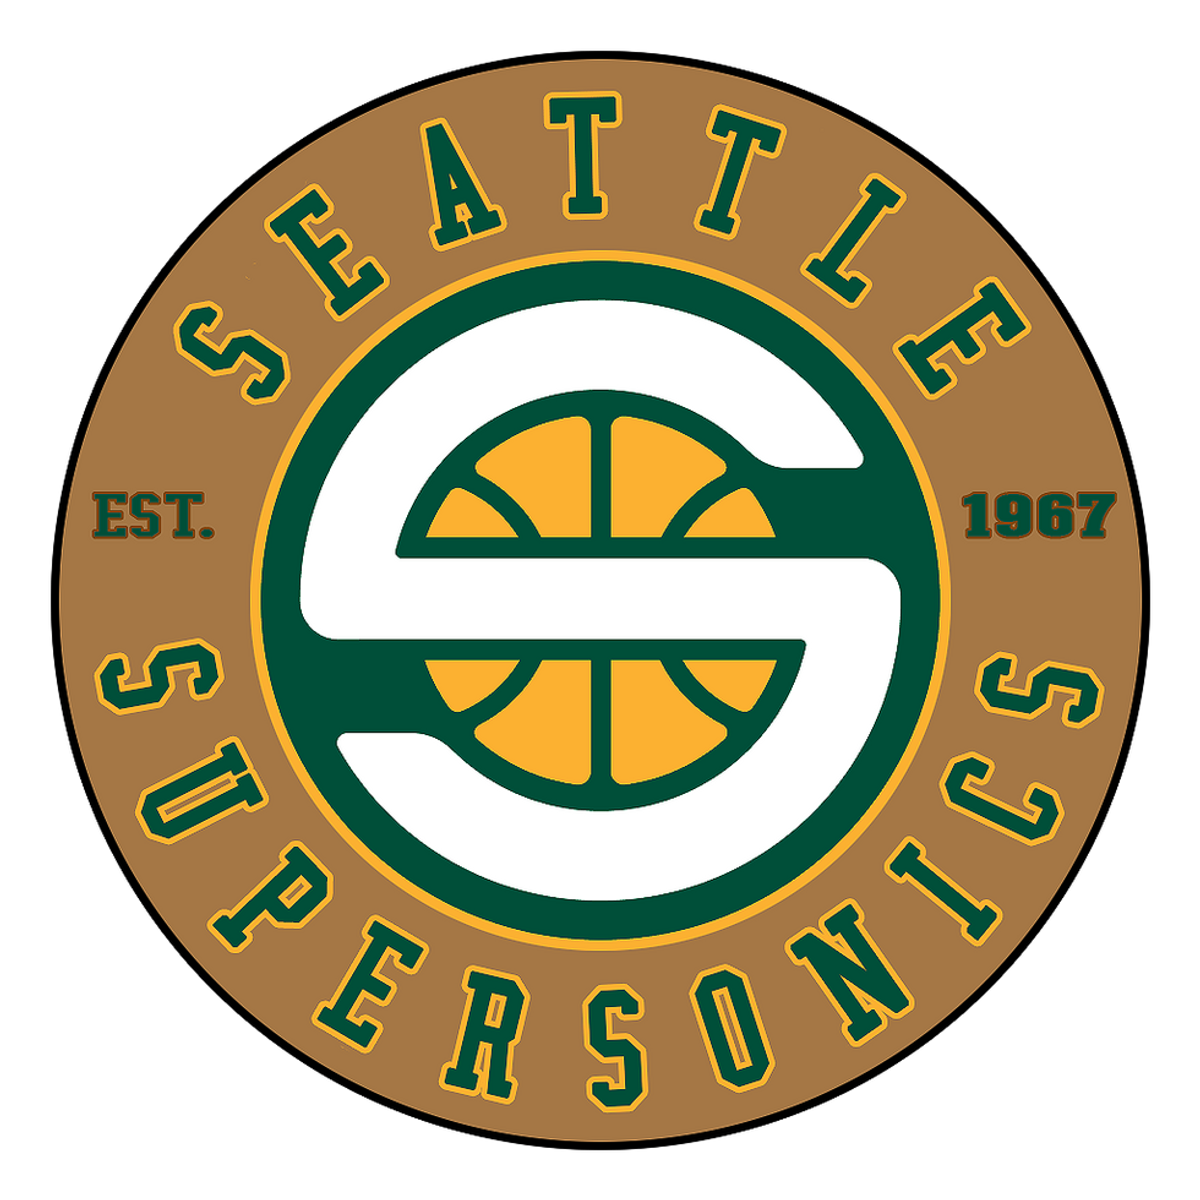 Give Seattle Its Supersonics Back